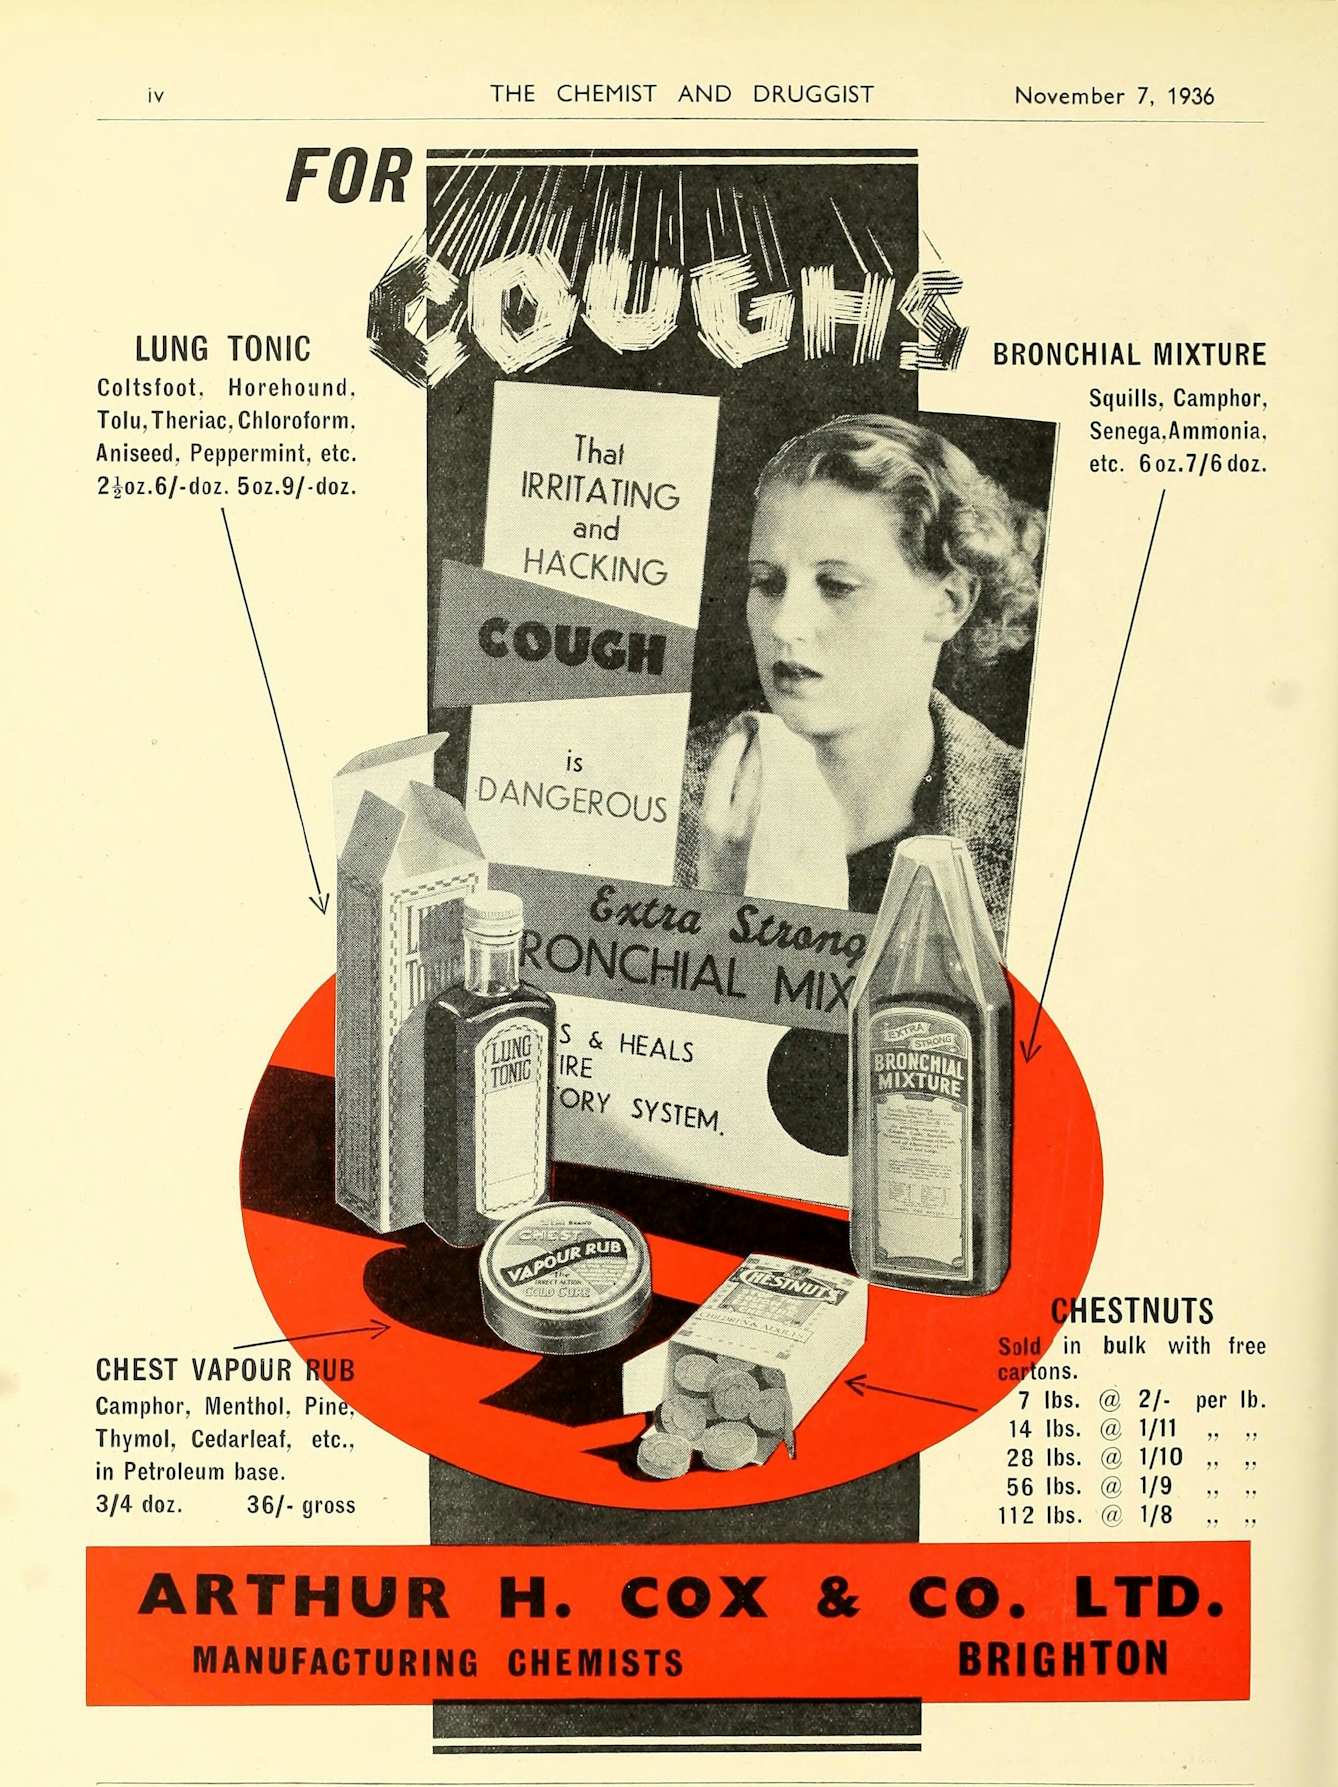 Advert for Arthur H. Cox & Co. products 1936